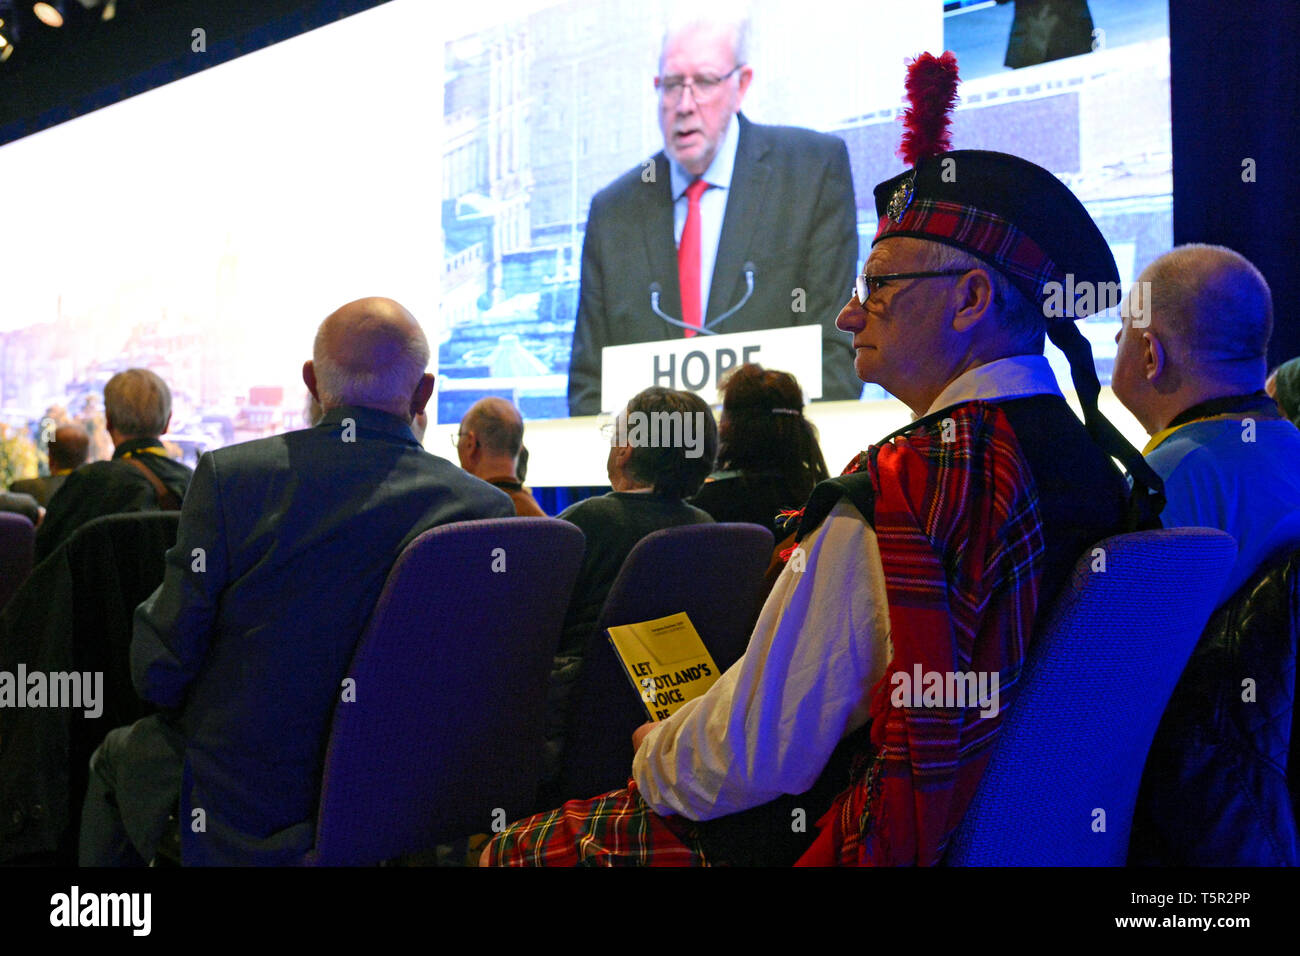 Edinburgh, Scotland, United Kingdom. 27th Apr, 2019. A delegate in Highland dress listens to the opening address at the Scottish National Party's Spring Conference in the Edinburgh International Conference Centre. Credit: Ken Jack/Alamy Live News Stock Photo